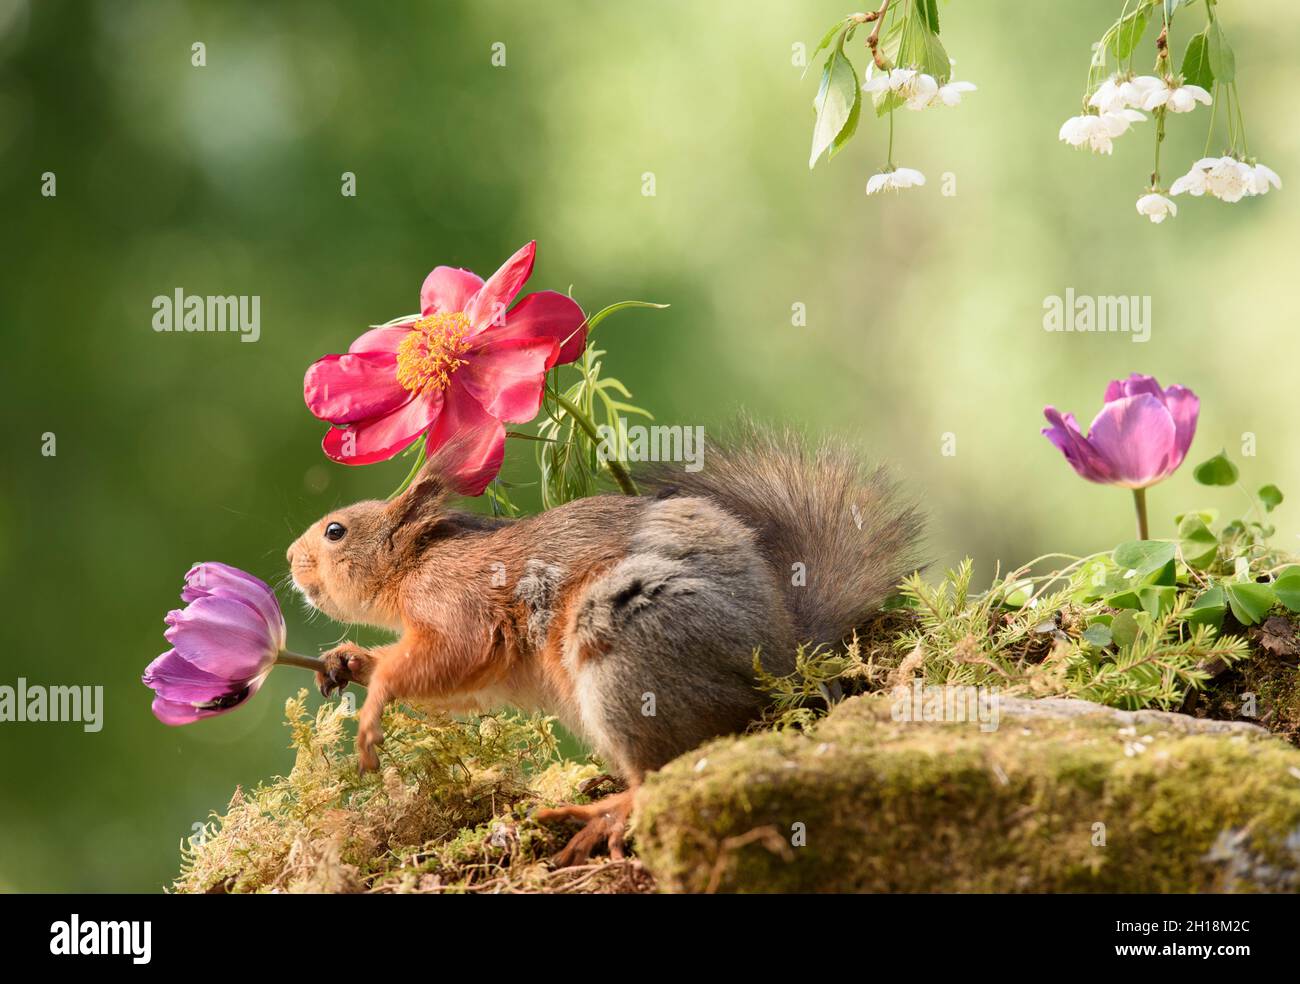 red squirrel is holding a tulip flower under cherry flower branches Stock Photo